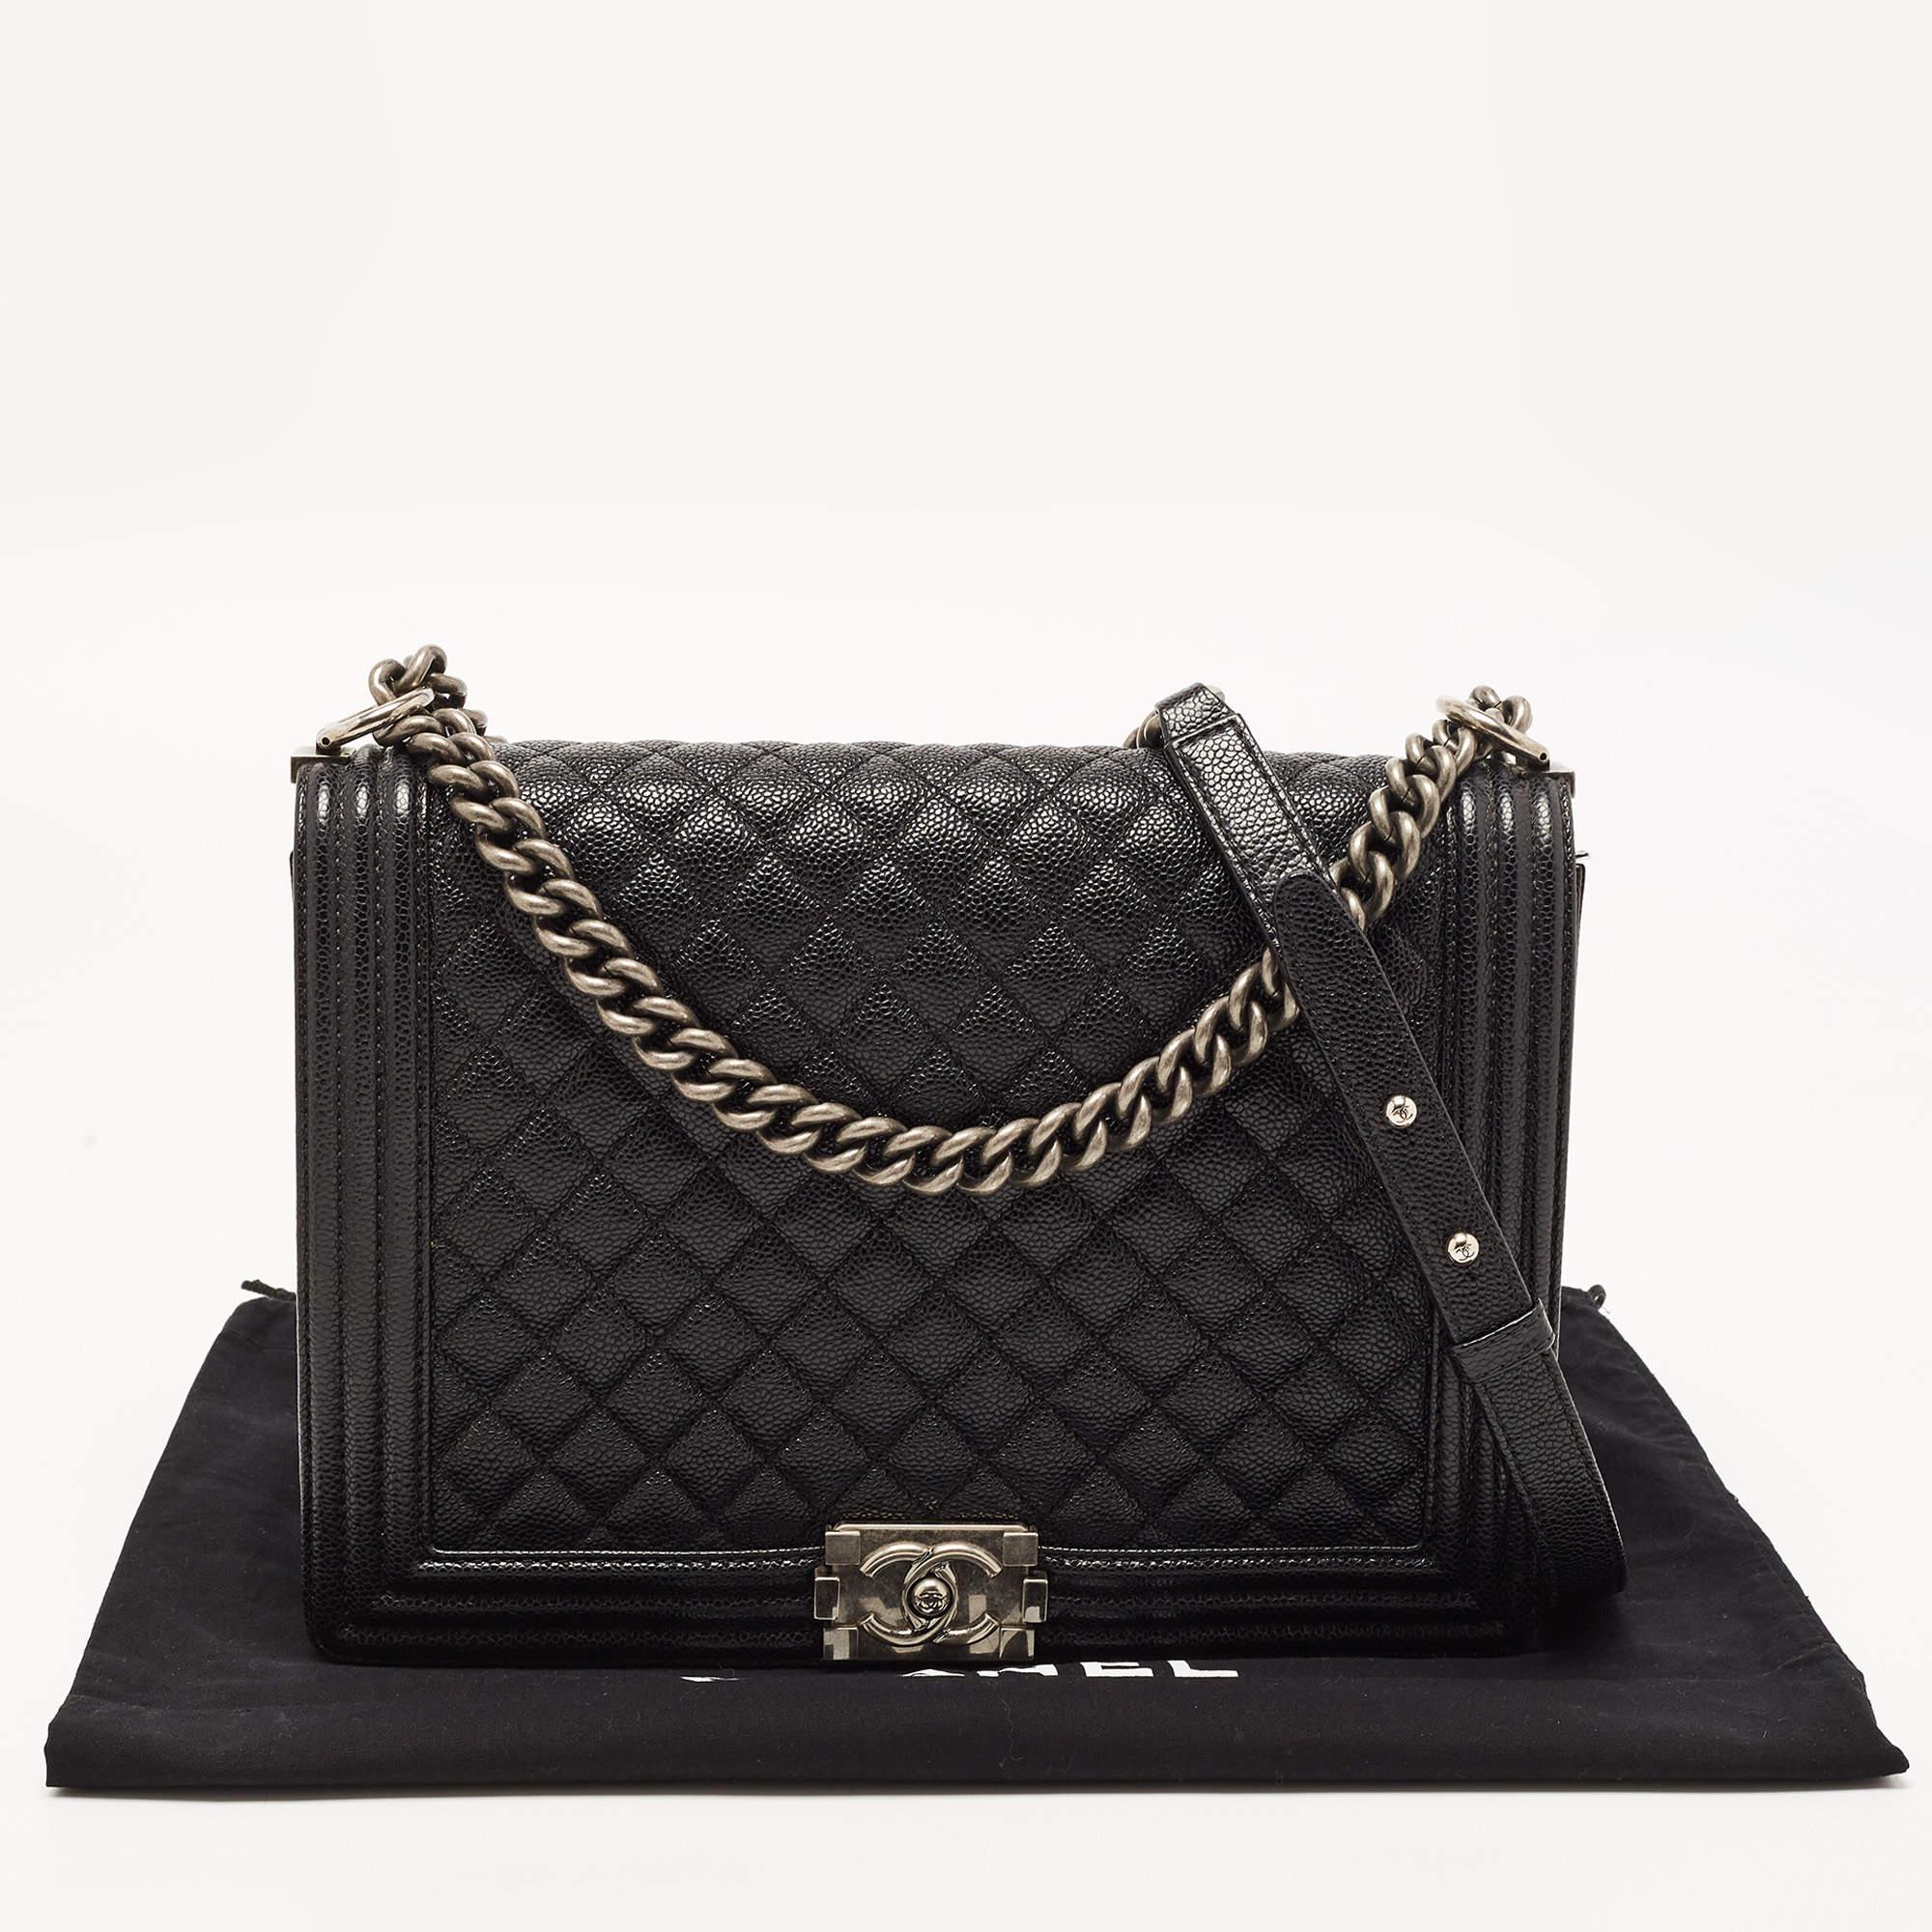 Chanel Black Quilted Caviar Leather Large Boy Flap Bag 9